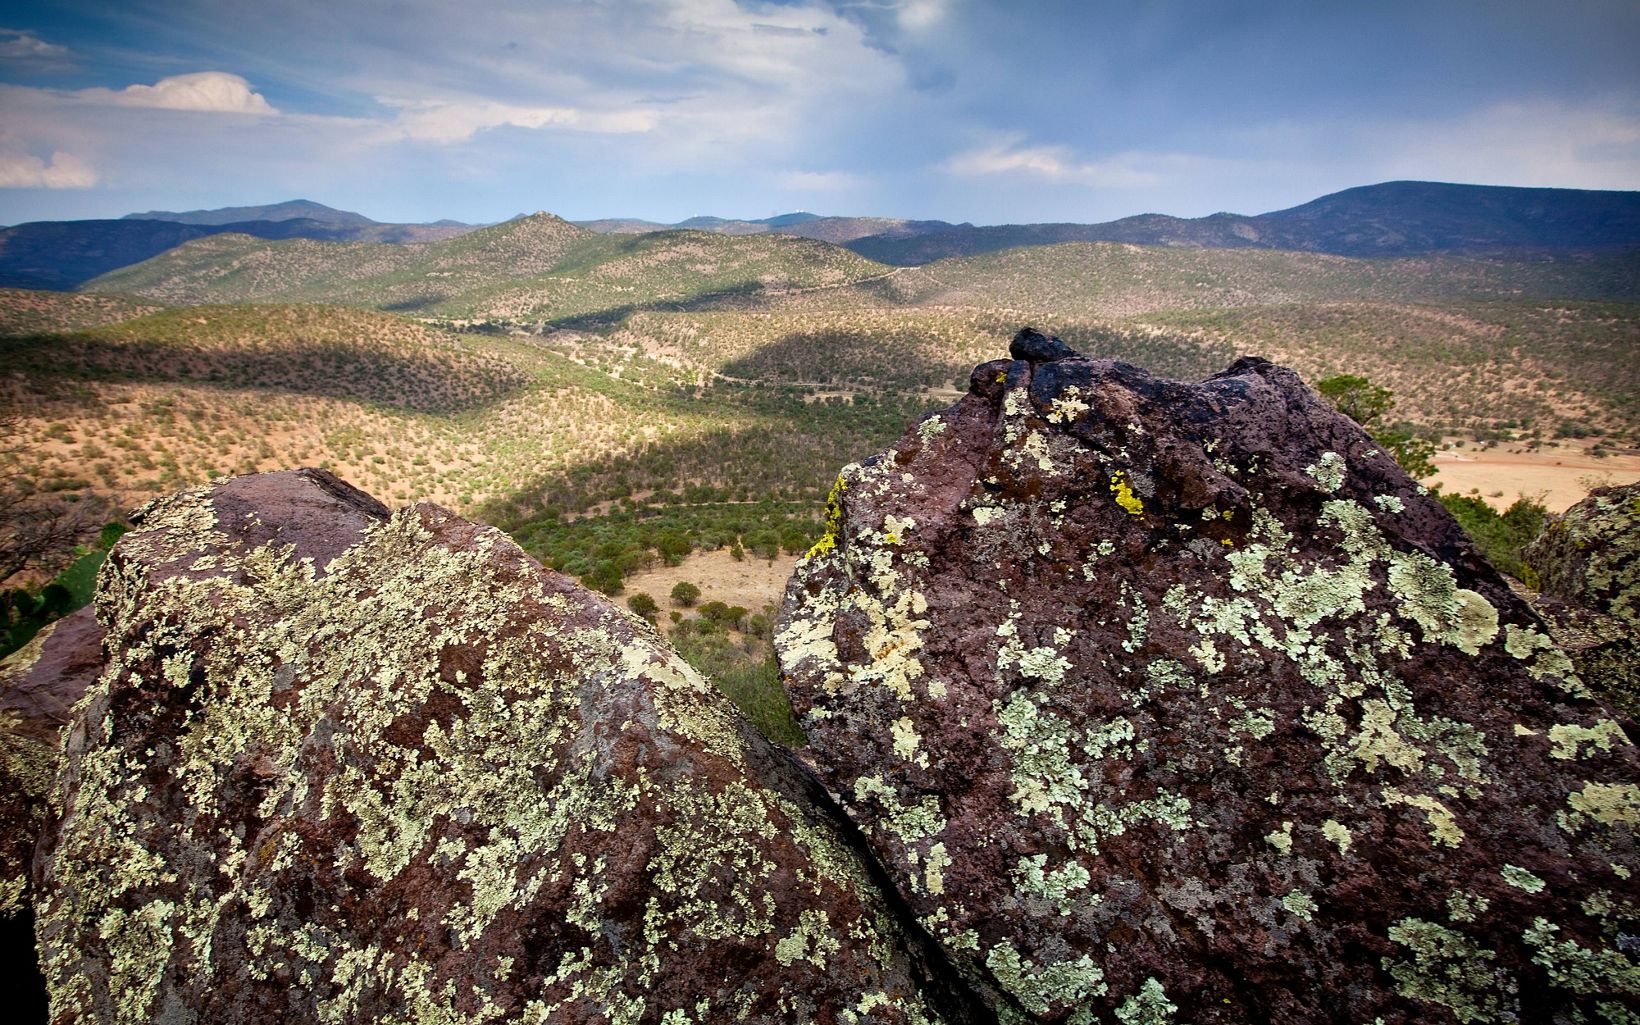 Rocks covered with lichen sit on a hillside overlooking the Davis Mountain Preserve landscape.